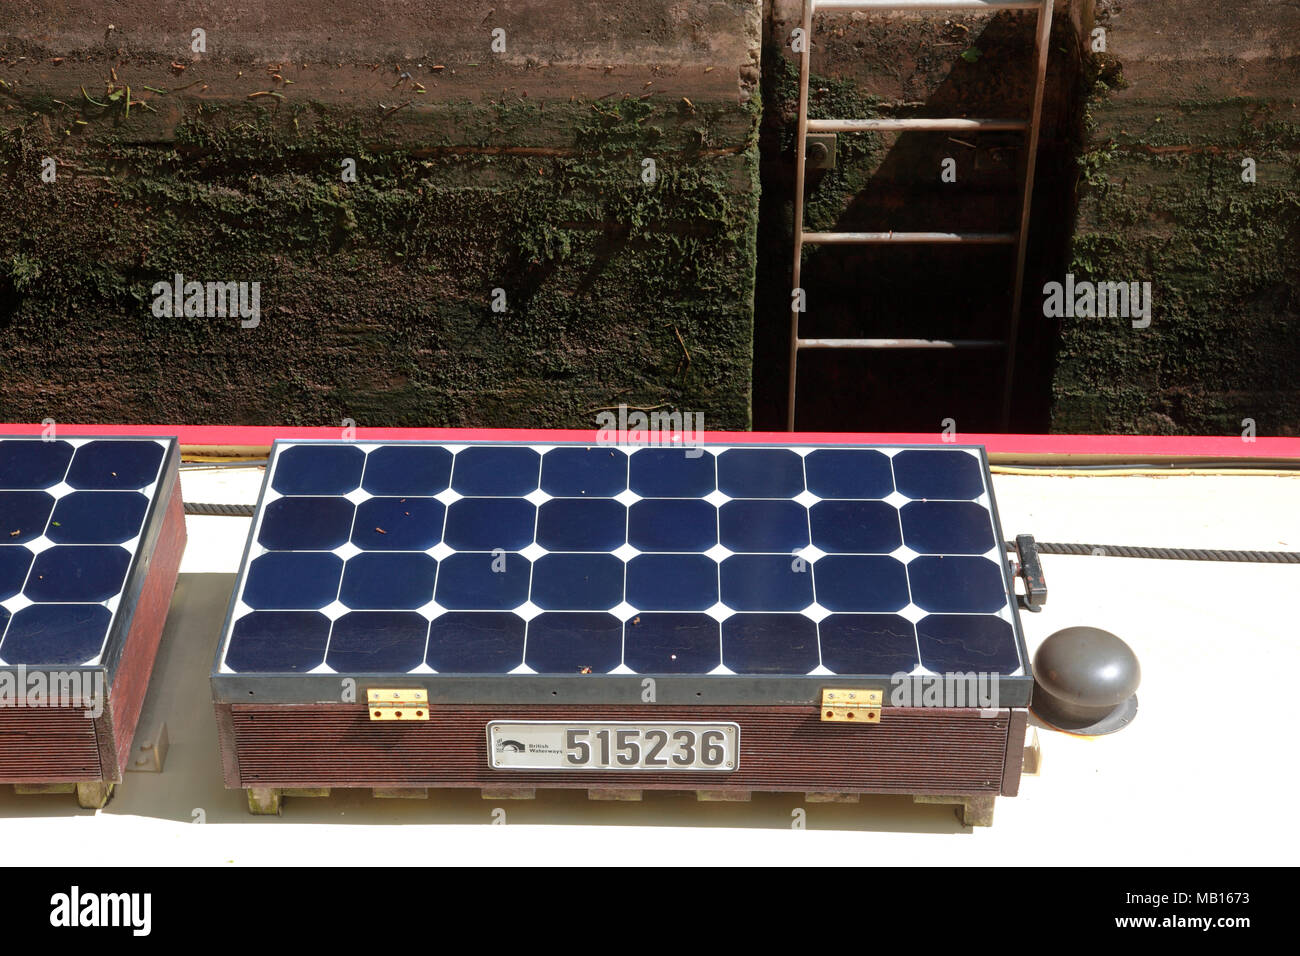 Solar panels on the roof of a canal narrowboat in a lock Stock Photo